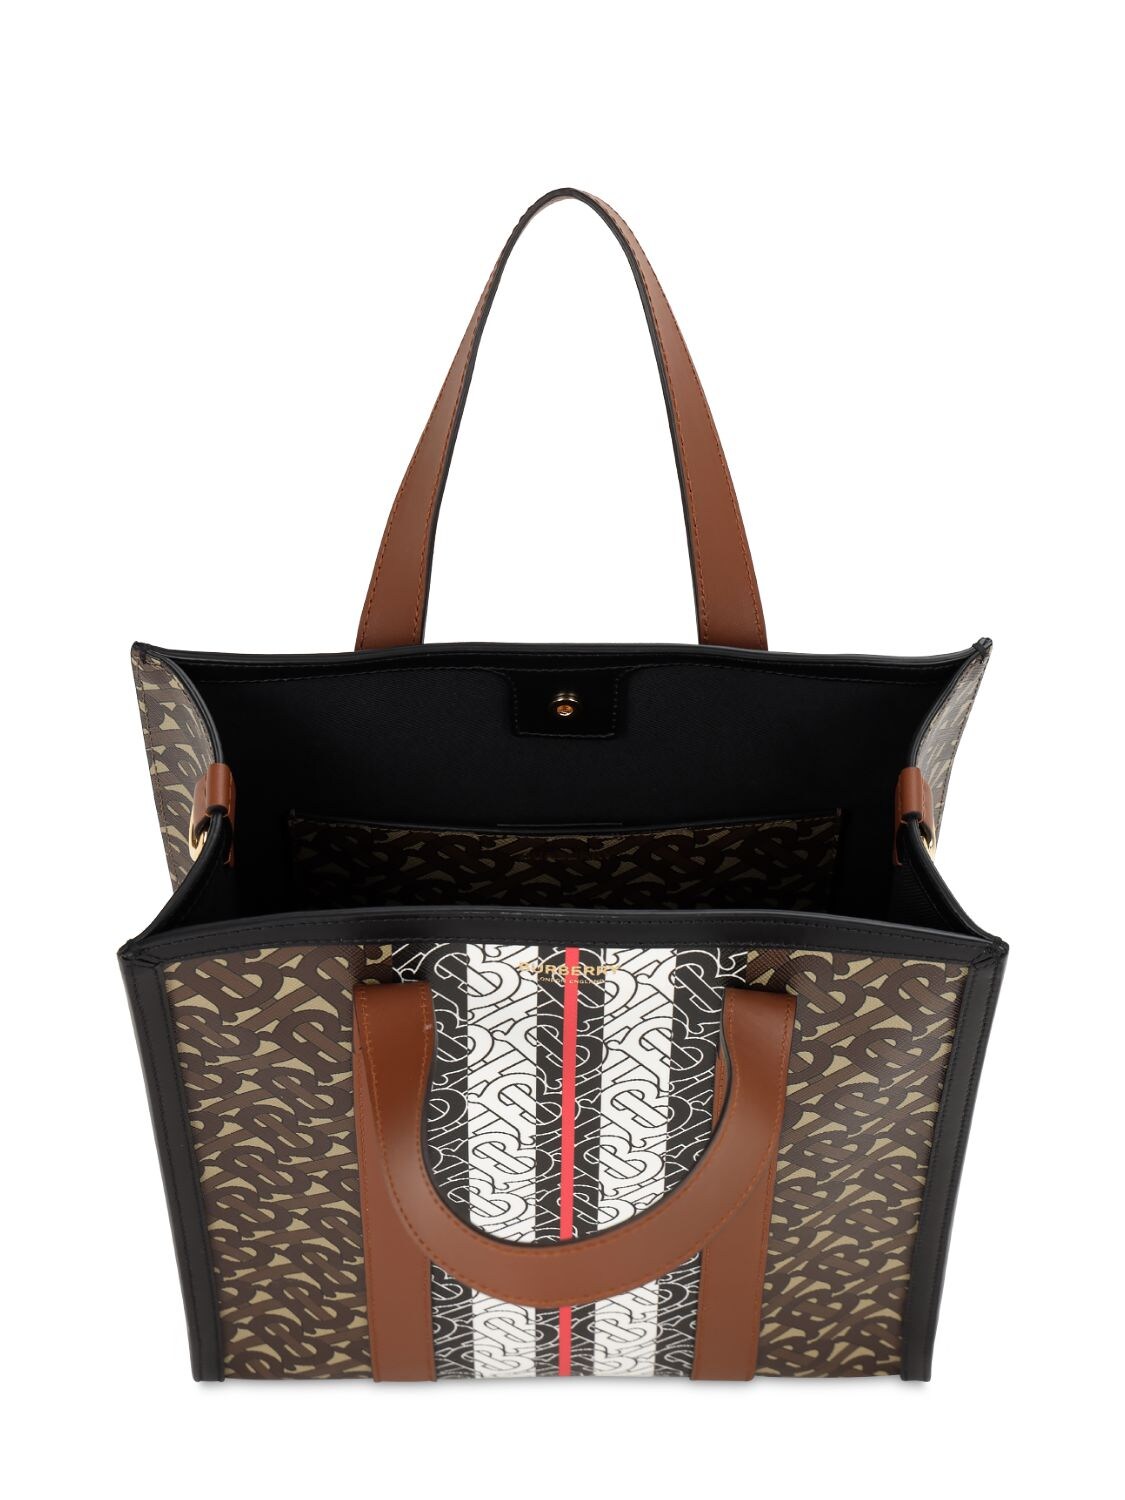 Burberry Vertical Tote Bag In E-canvas With Striped Monogram Print In Bridle Brown | ModeSens